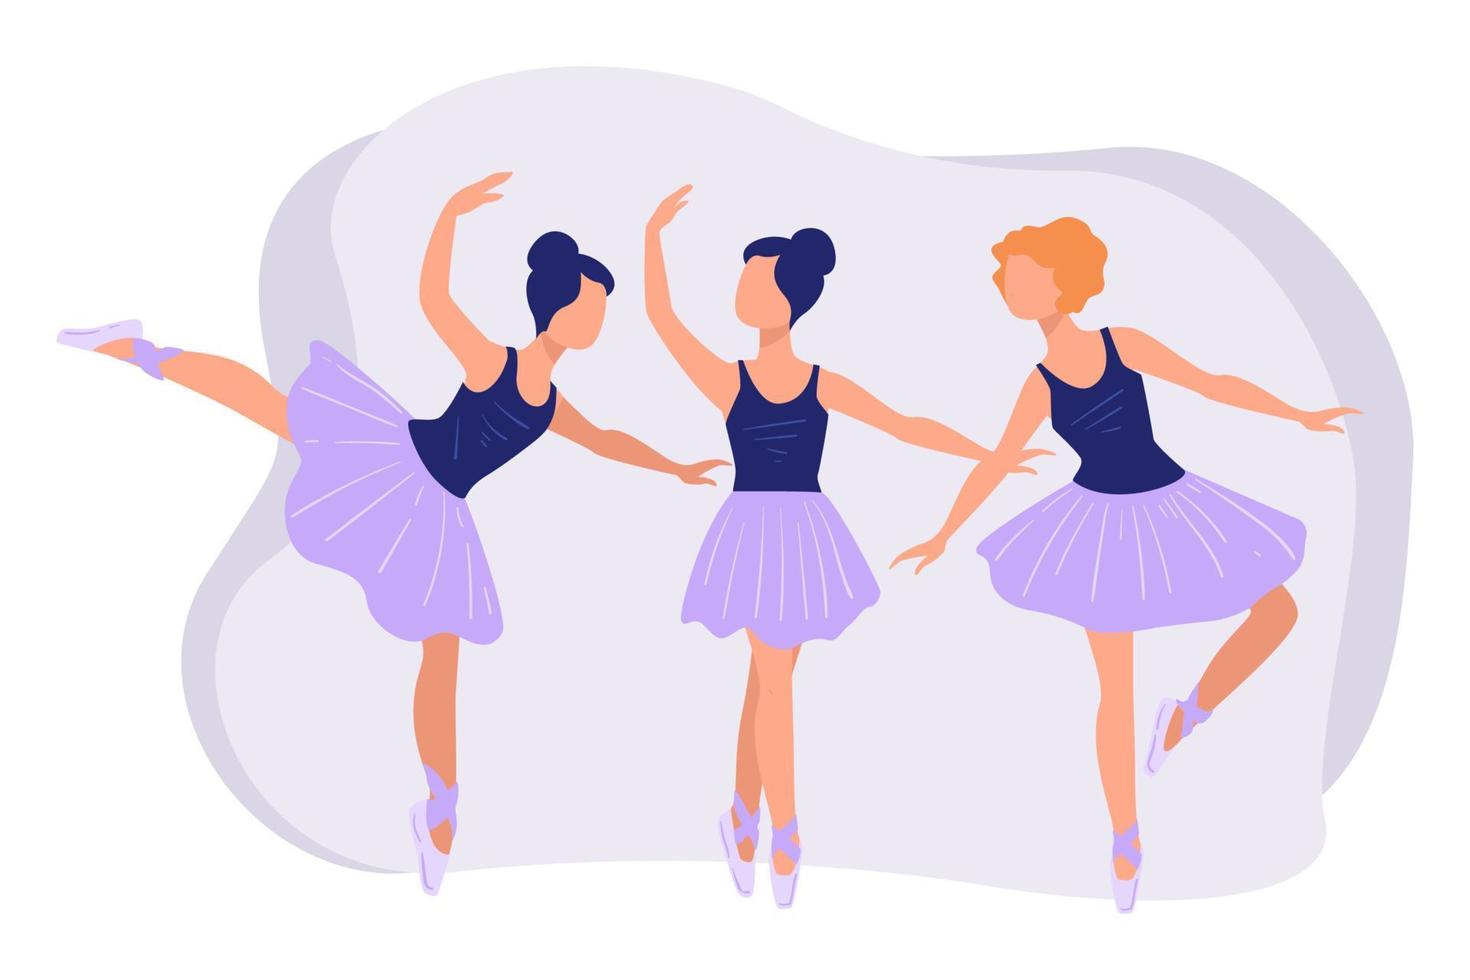 Female ballet dancers practicing, preparing for stage performance vector